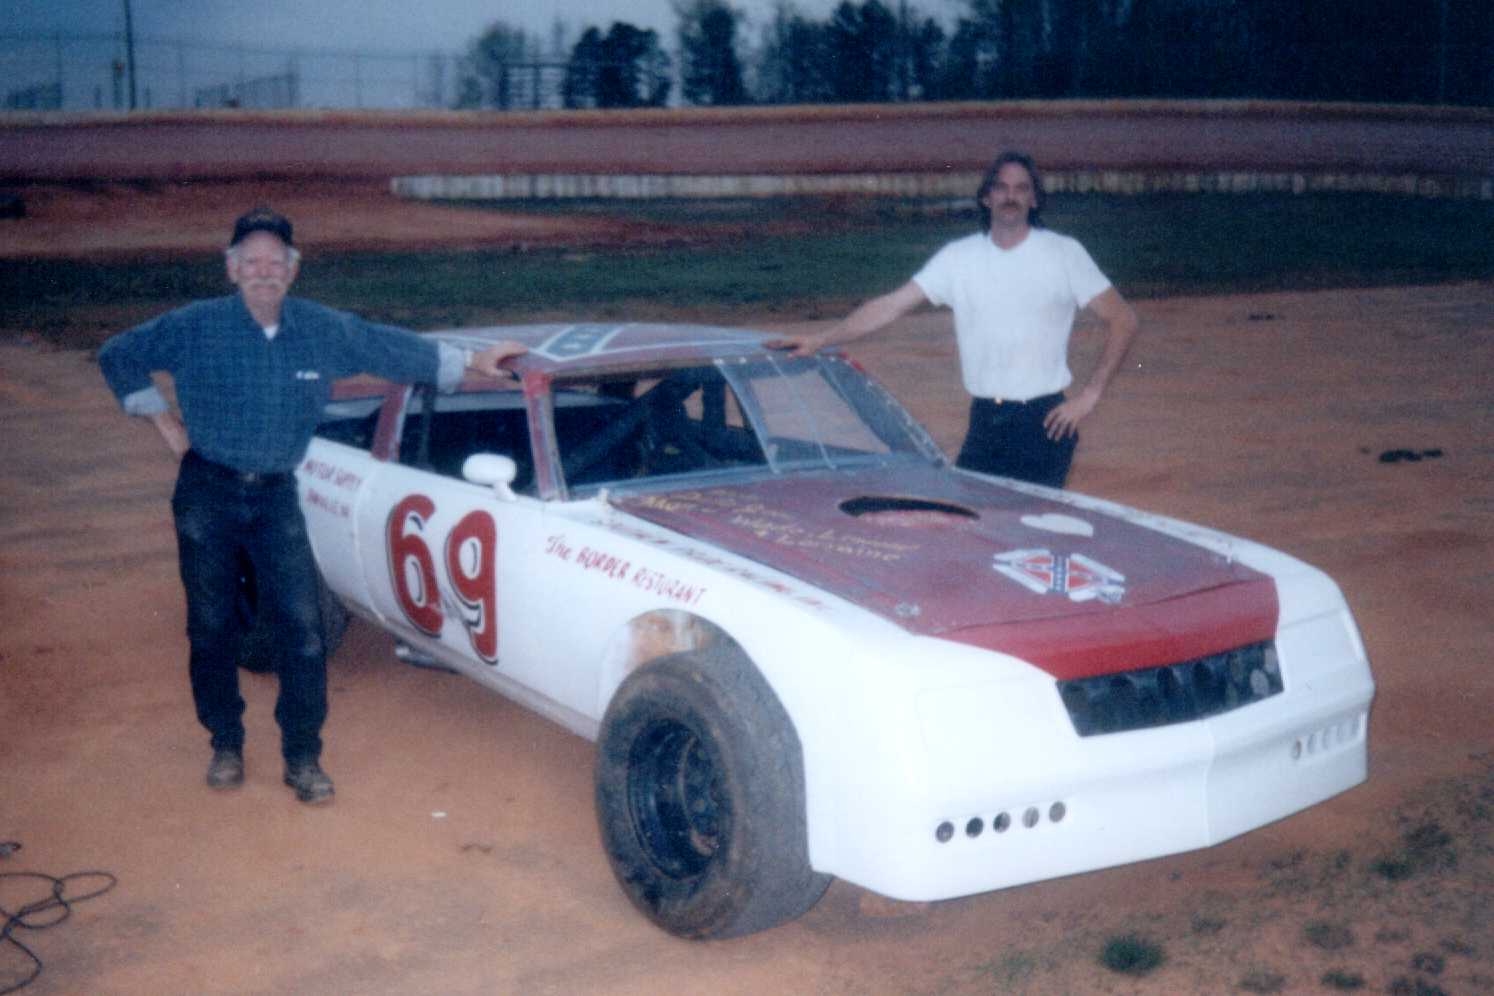 Wade Harris and Charles Harris with #69 at Wayne County Speedway